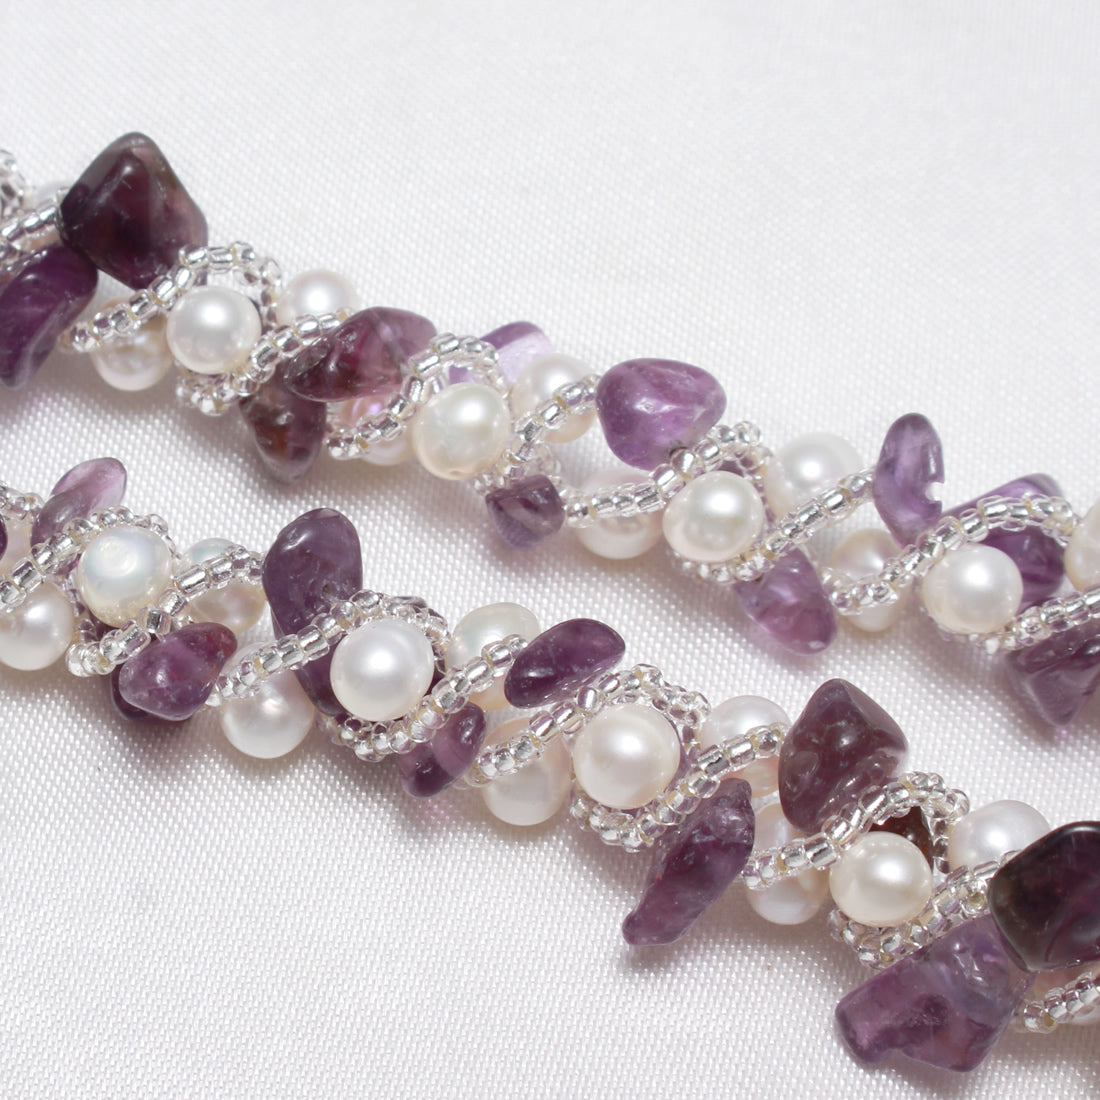 Freshwater Pearl,  Amethyst & Glass bead Necklace - Brass Magnetic clasp white, 6 -7 mm 5-11 mm Approx 16.5 Inch Long